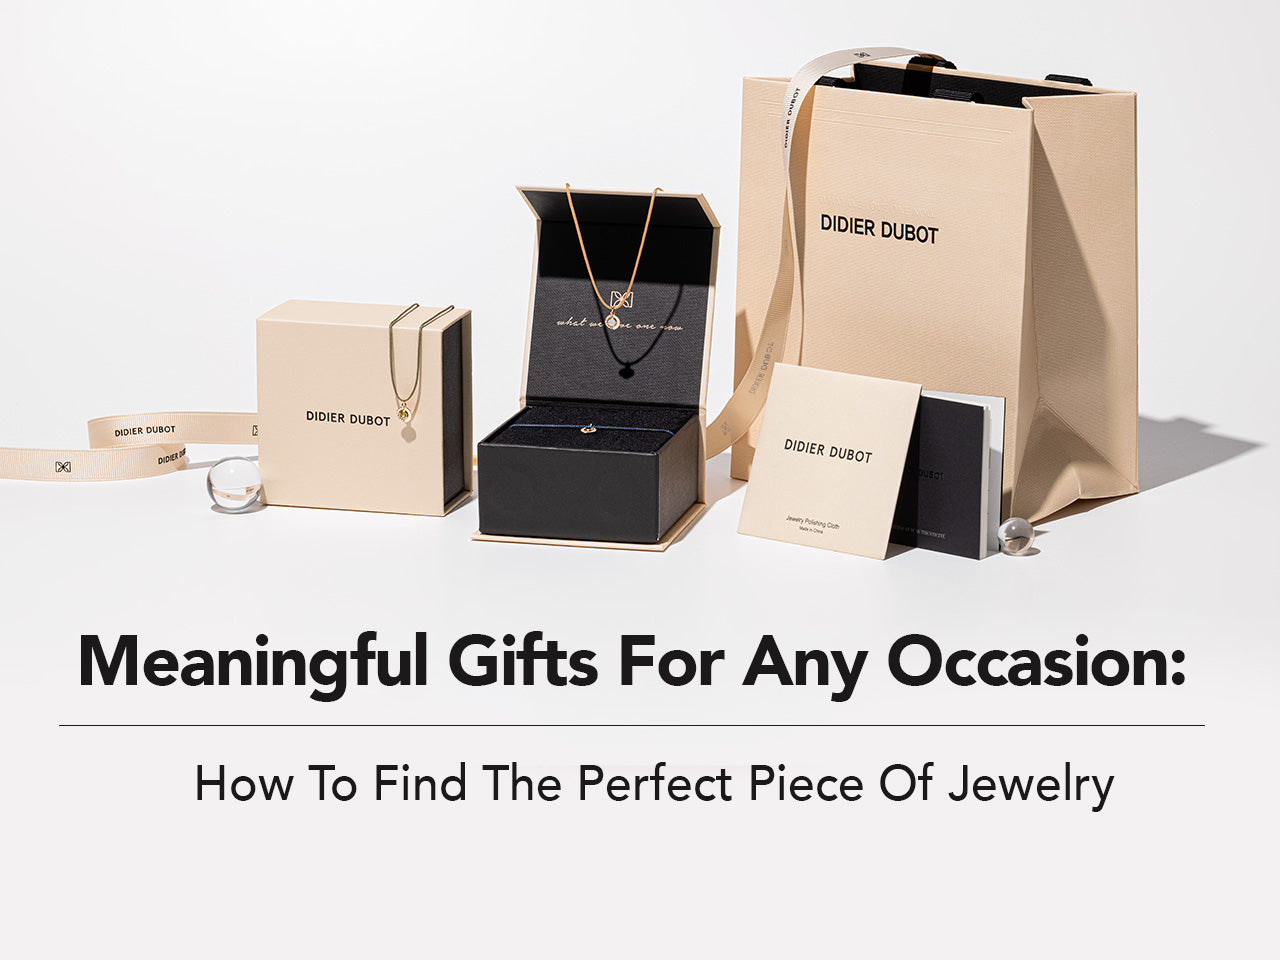 Meaningful Gifts For Any Occasion: How To Find The Perfect Piece Of Jewelry